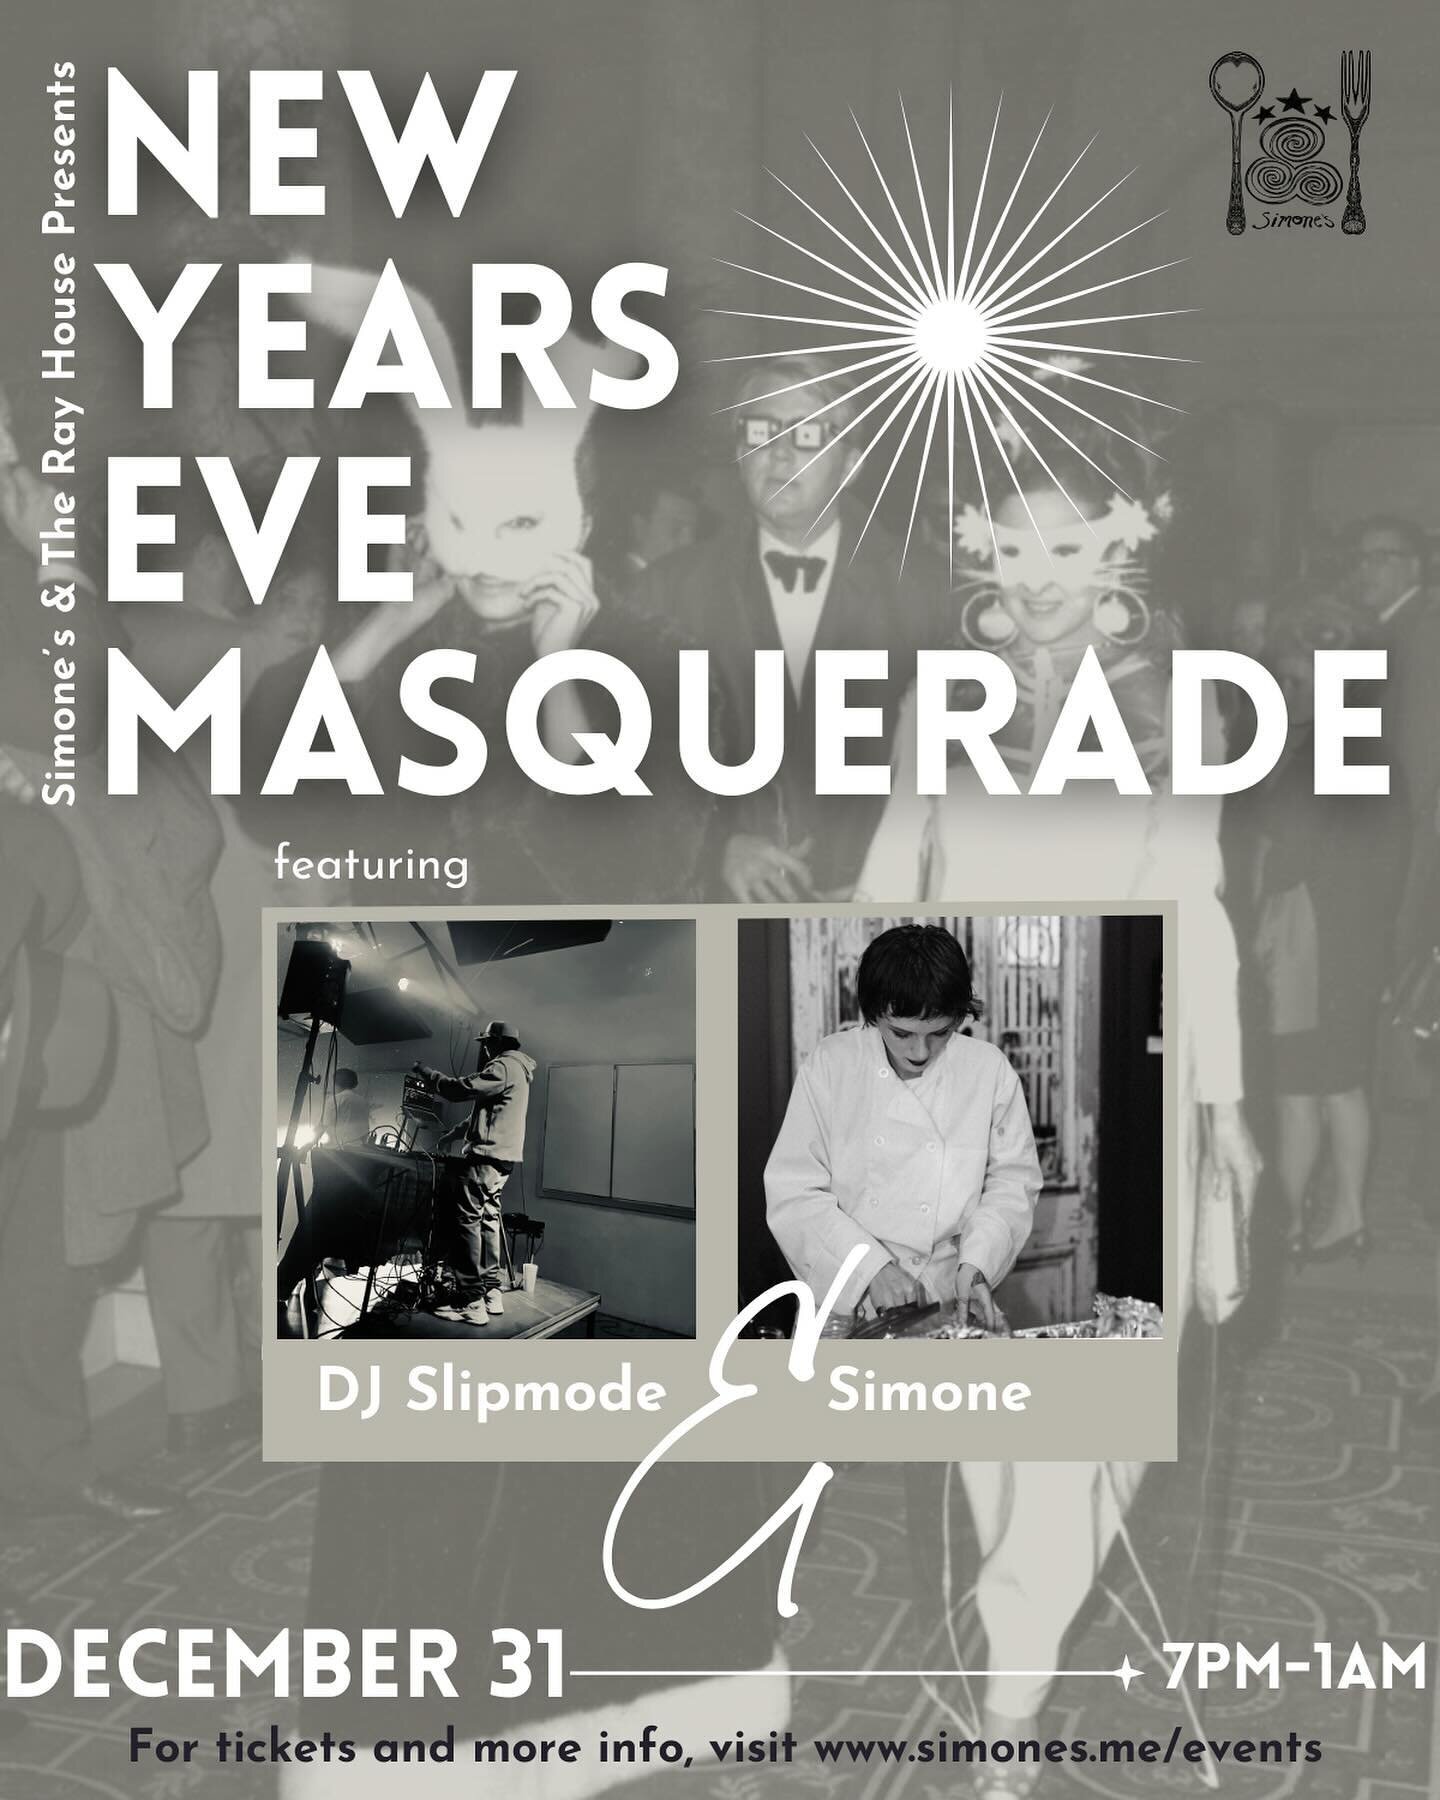 Celebrate with us and prepare for an unforgettable evening as we pop some champagne and enjoy some end-of-the-year celebratory music (featuring Slip mode as our DJ) paired with canap&eacute;&rsquo;s, beverages, decor, and good friends or lovers. 

Ti